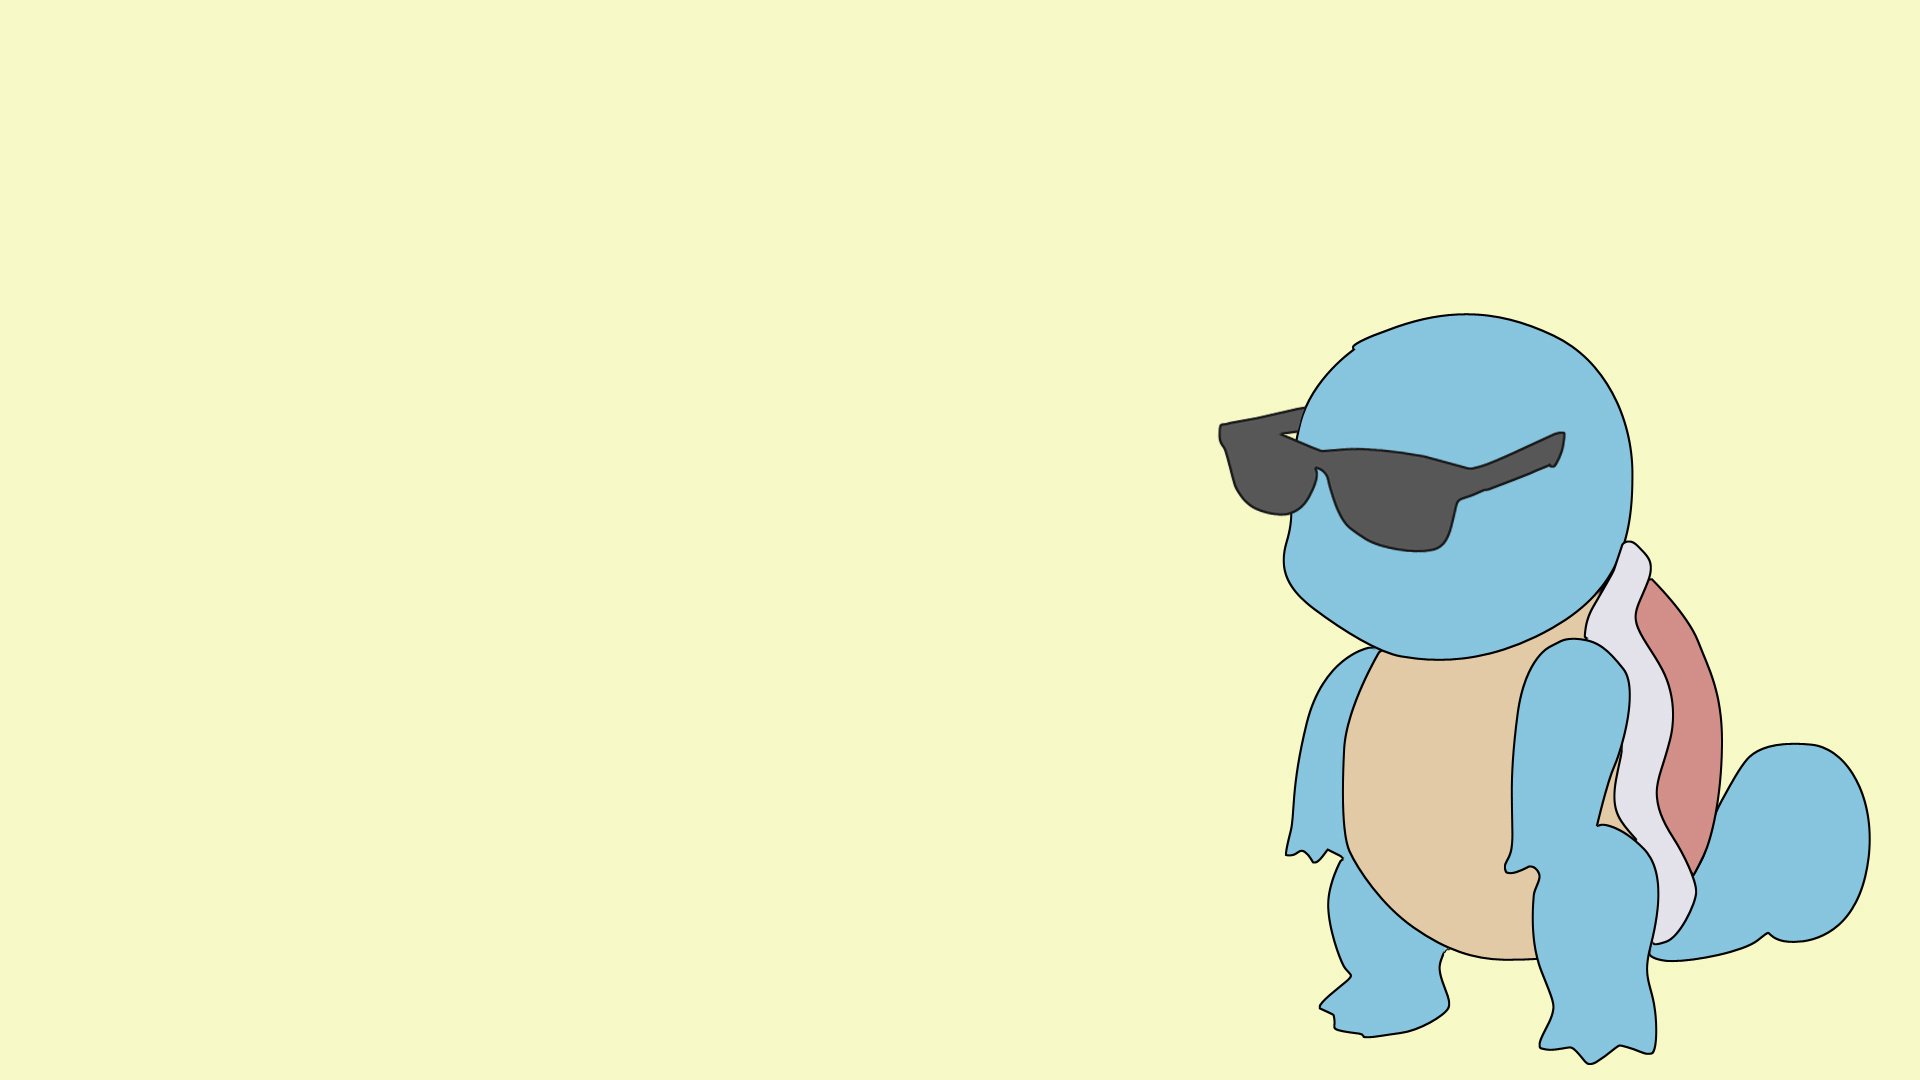 Free download Cute Squirtle Wallpaper Image amp Picture Becuo [1920x1080] for your Desktop, Mobile & Tablet. Explore Squirtle Wallpaper. Charmander Wallpaper, Derpy Squirtle Wallpaper, Teenage Mutant Ninja Squirtle Wallpaper